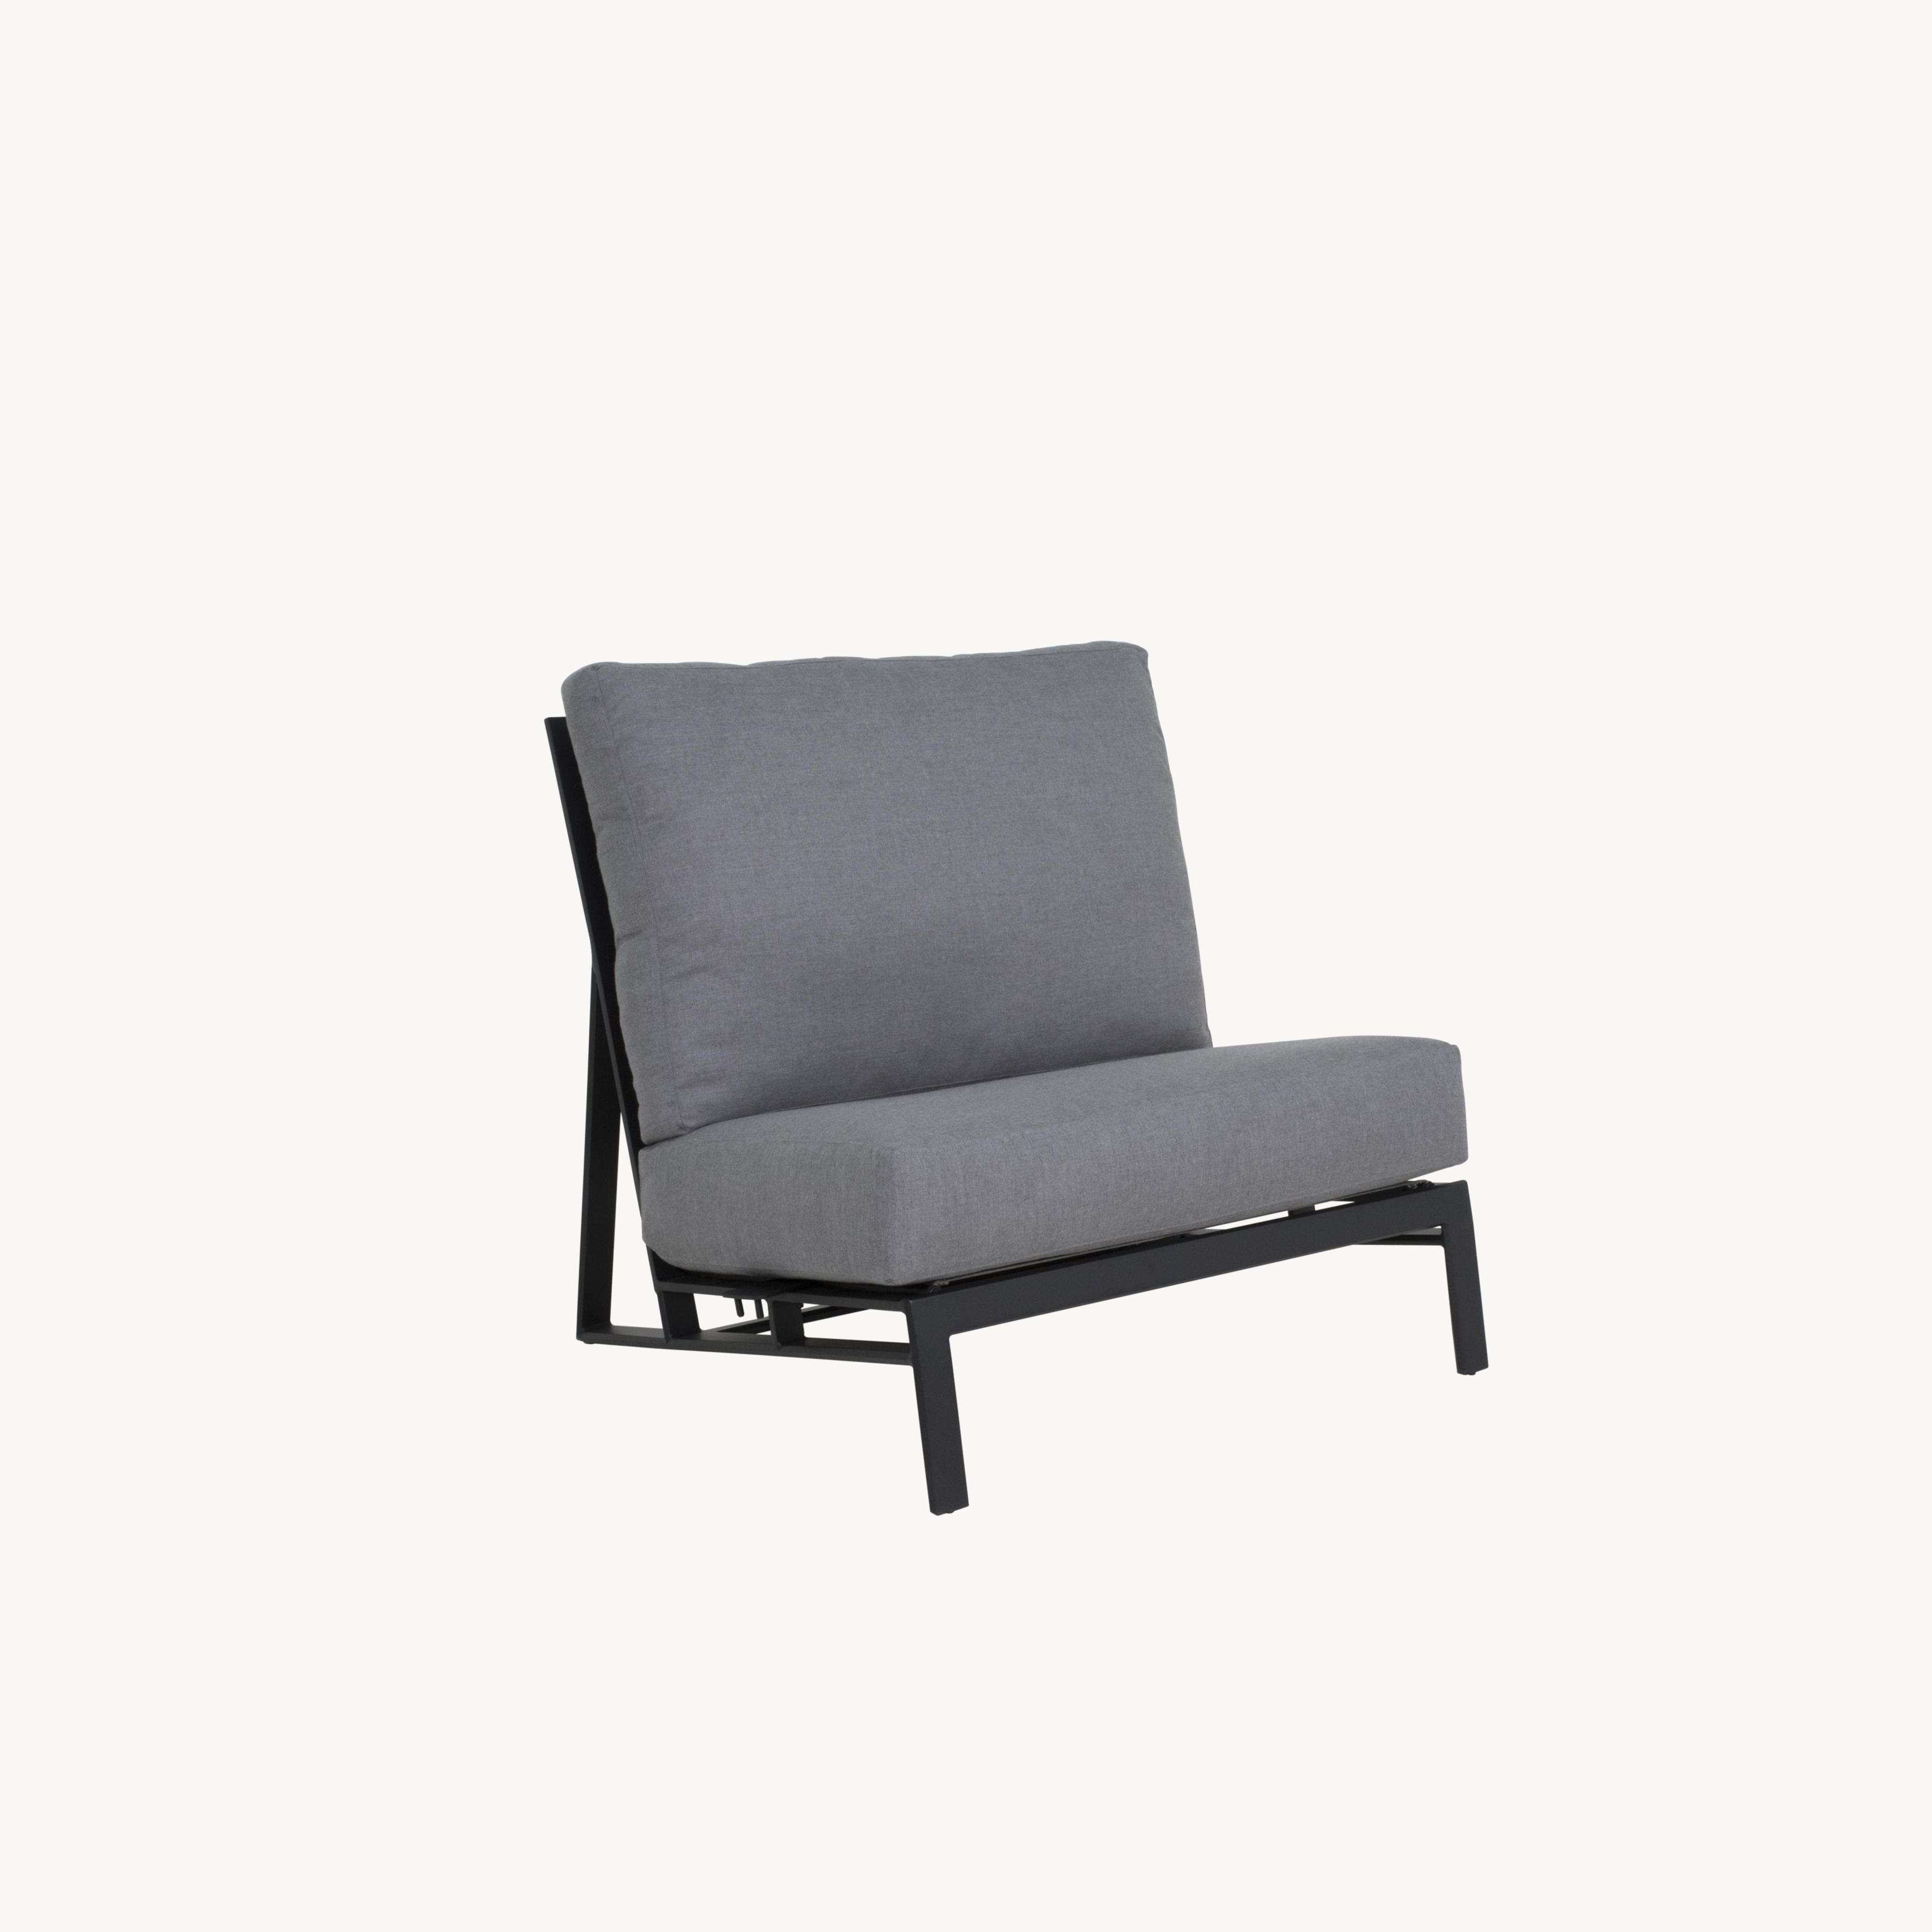 Prism Sectional  Armless Lounge Unit By Castelle